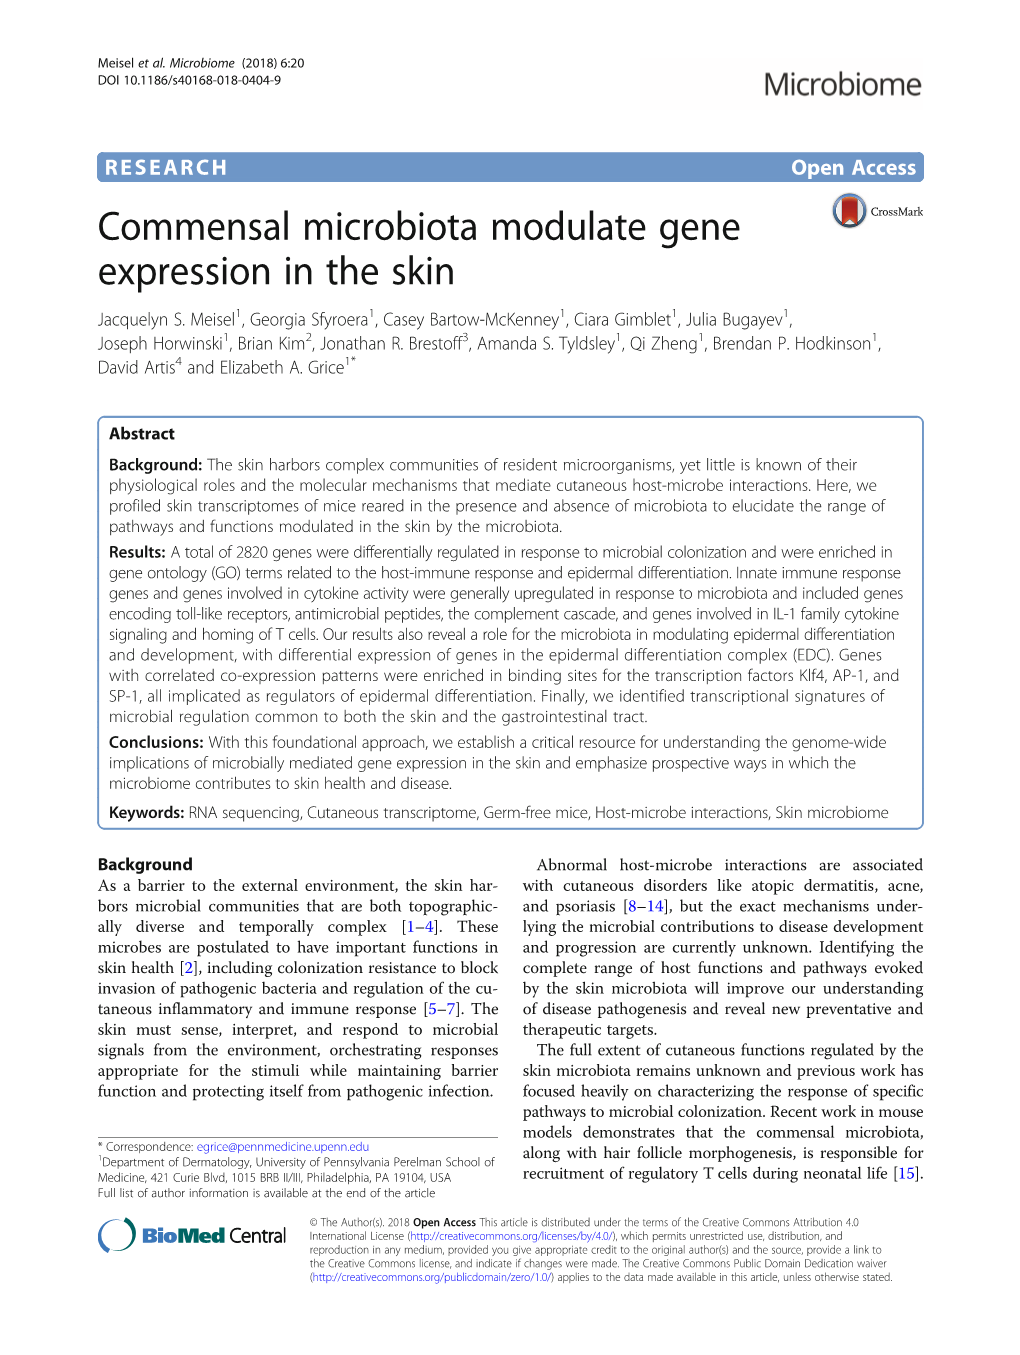 Commensal Microbiota Modulate Gene Expression in the Skin Jacquelyn S